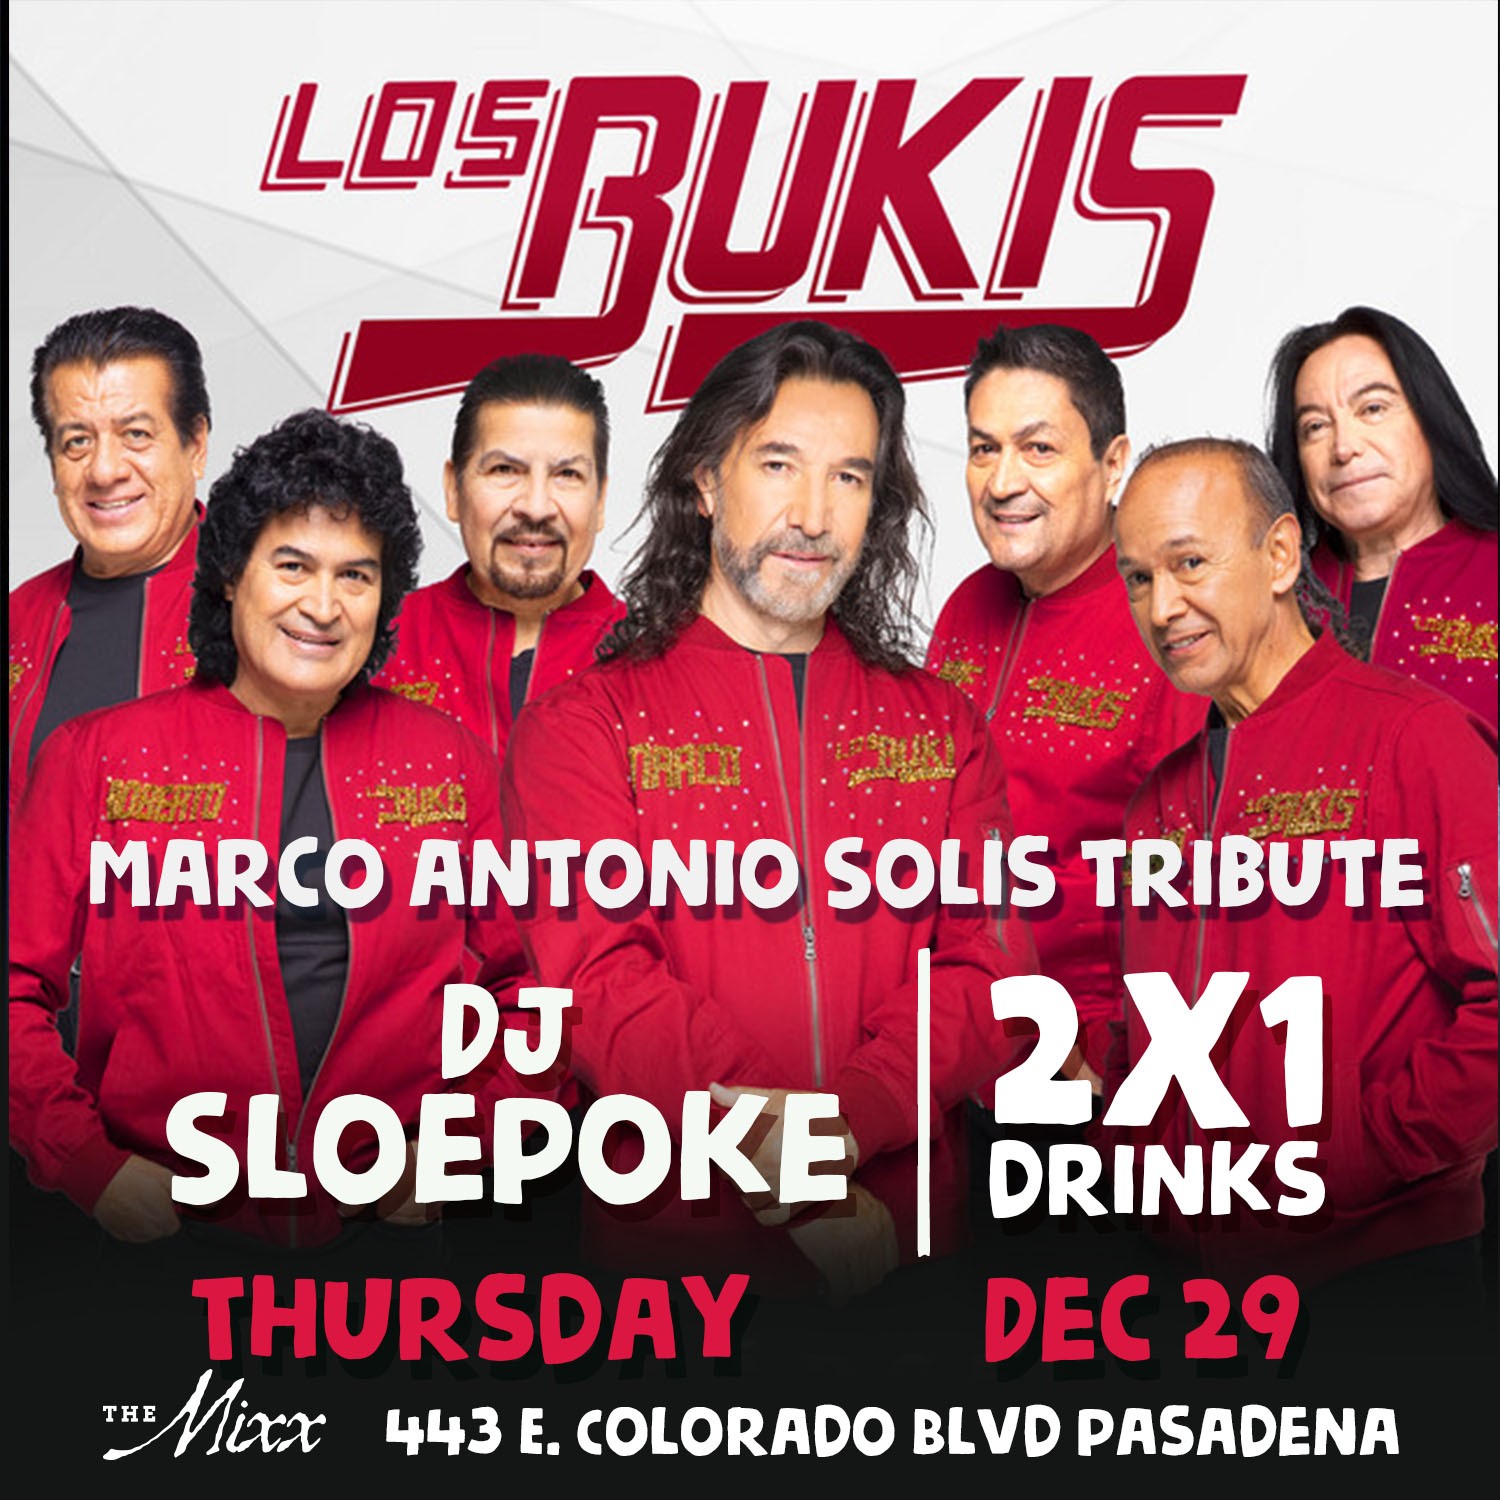 You are currently viewing Latin Holiday Fiesta, Tribute to Marco Antonio Solis y Los Bukis